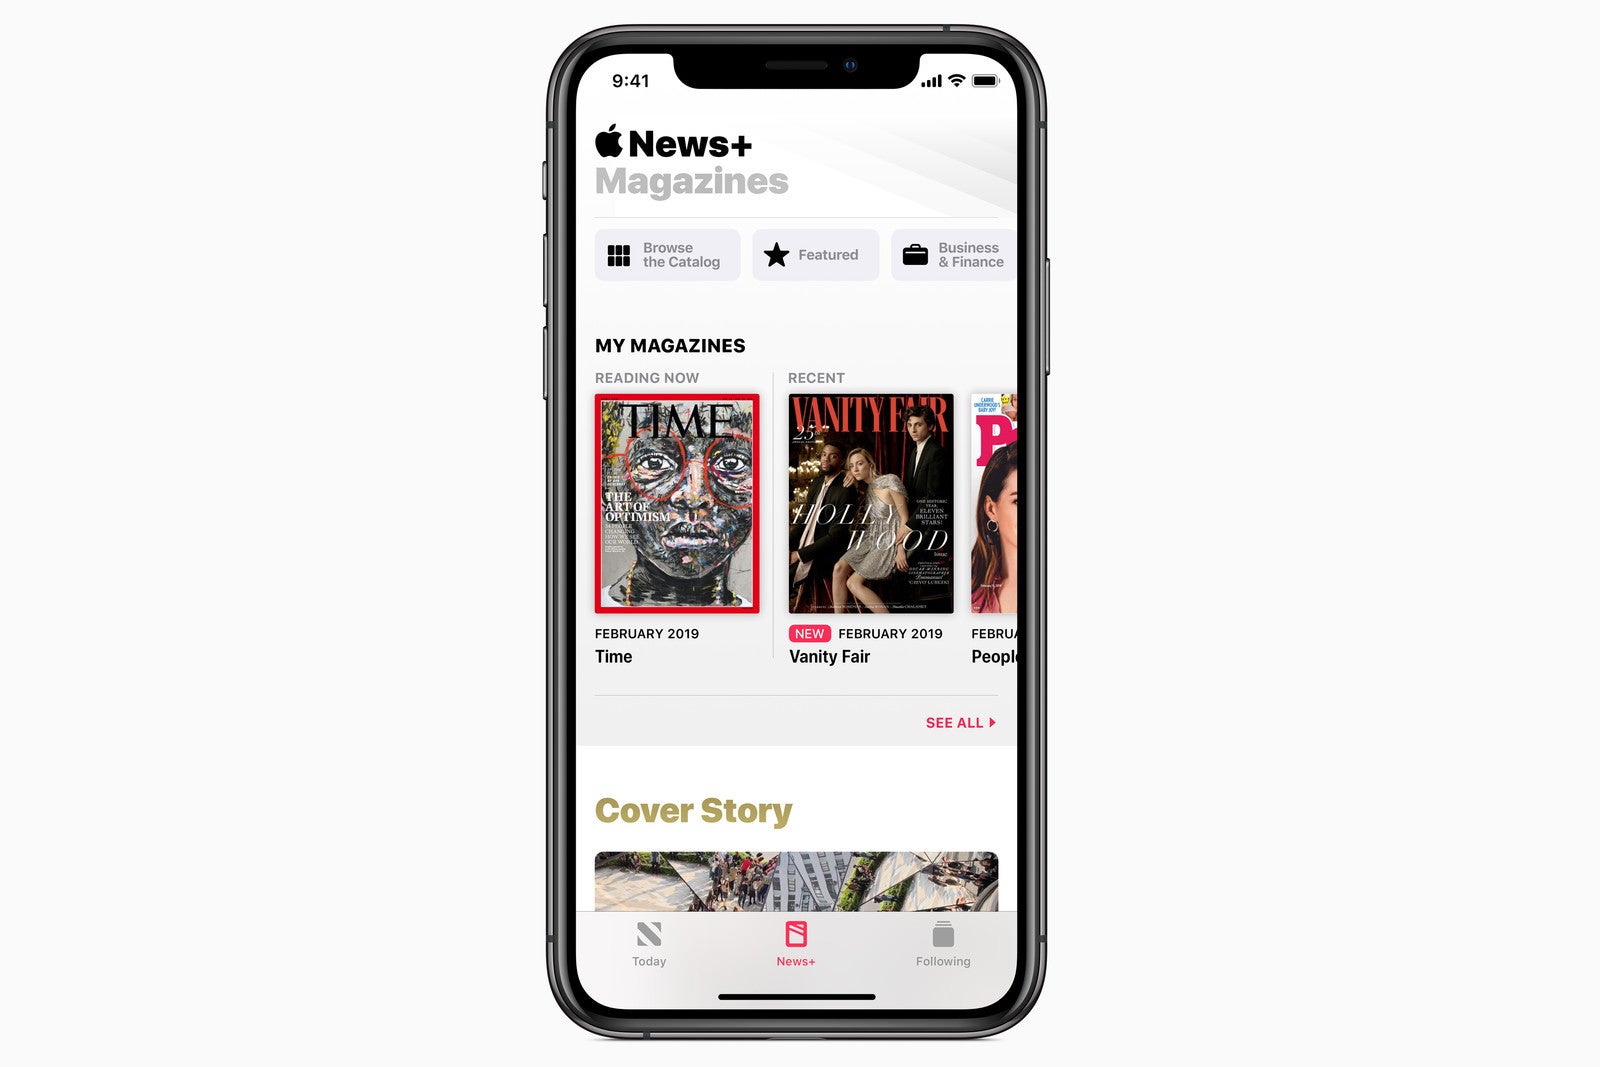 Apple News+ subscription service is announced with 300+ magazines to flip through